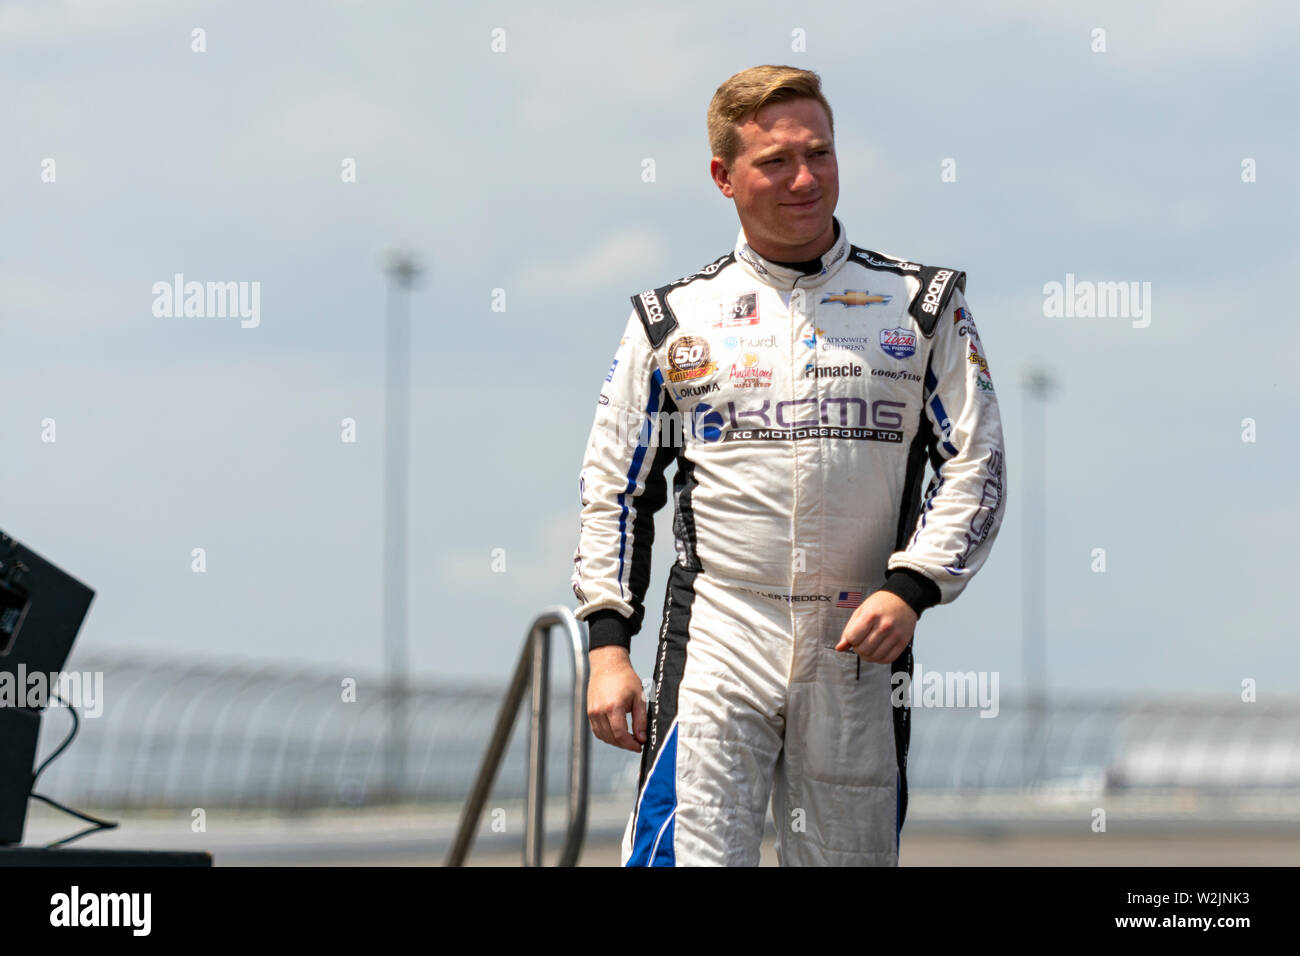 Joliet, IL, United States - June 29, 2019: Tyler Reddick being introduced before NASCAR XFinity Series Camping World 300 race. Stock Photo